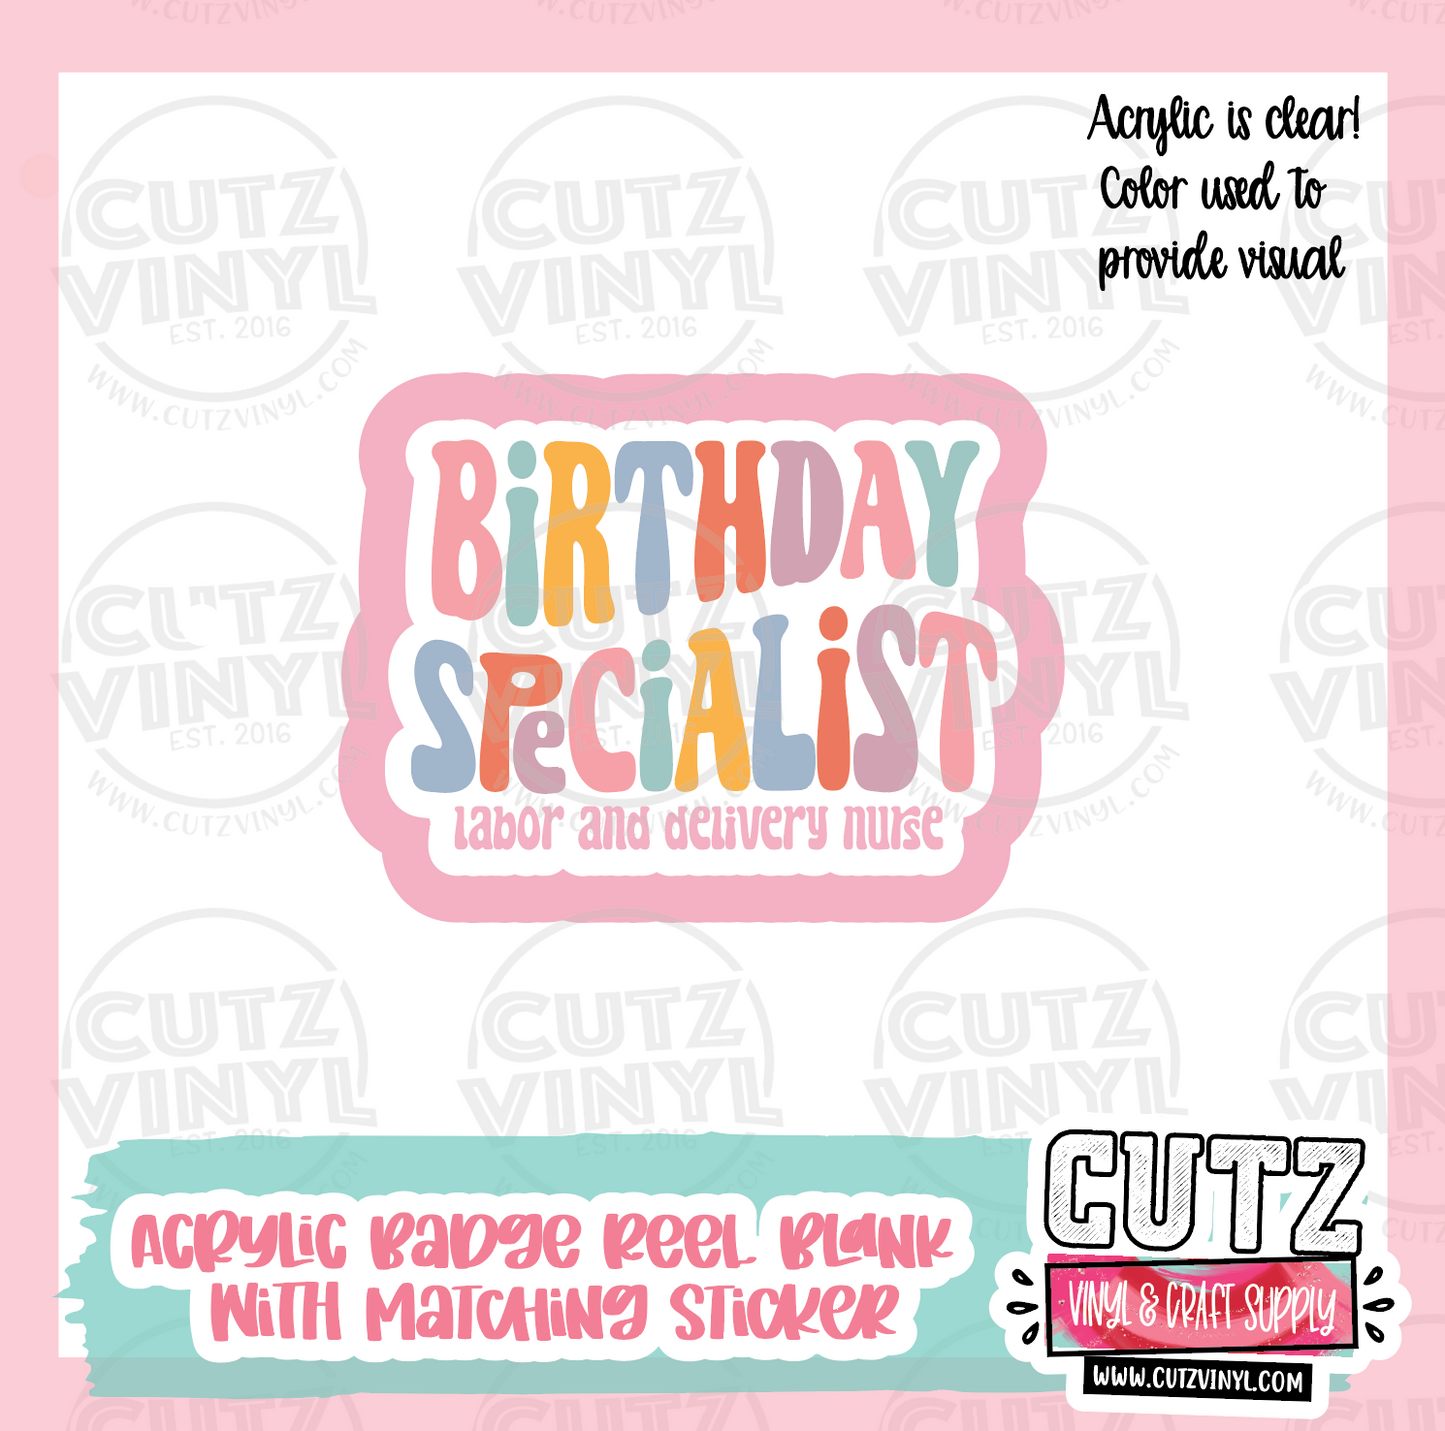 Birthday Specialist - Acrylic Badge Reel Blank and Matching Sticker